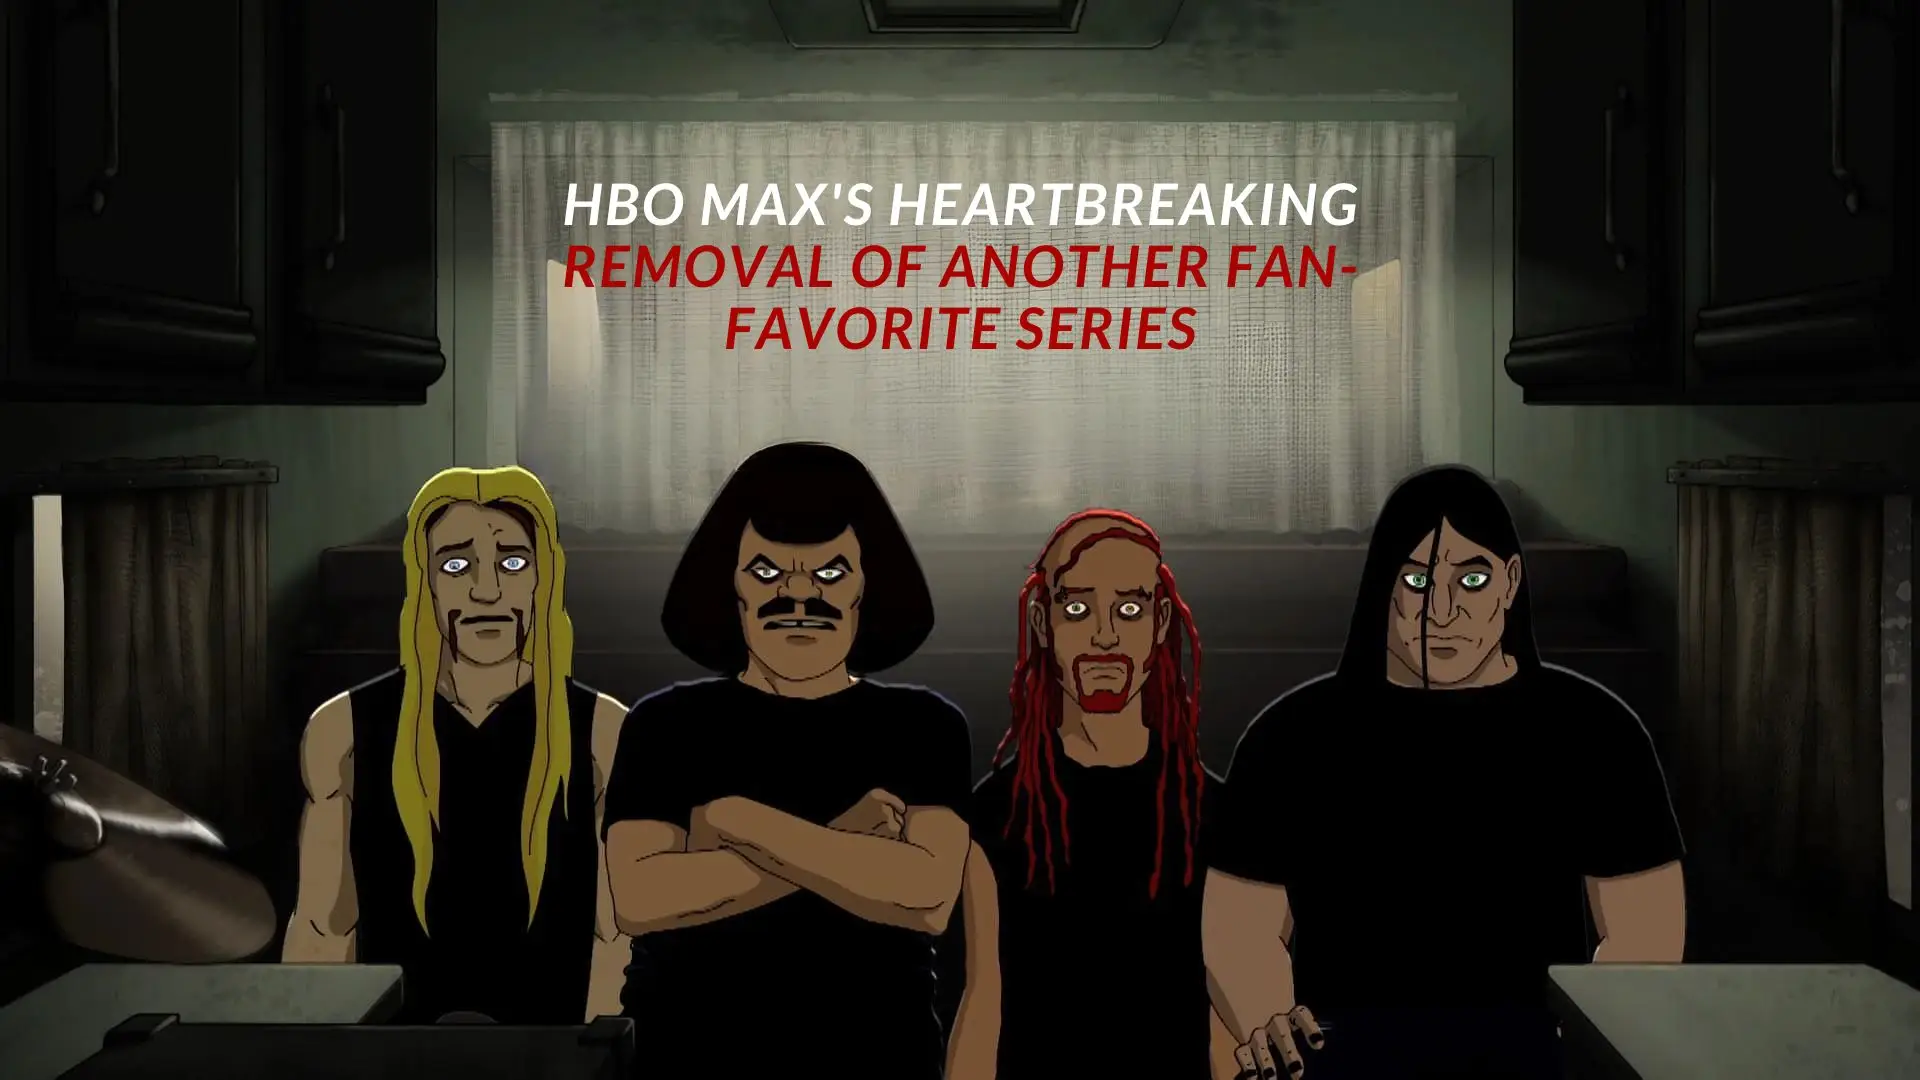 HBO Max's Heartbreaking Removal of Another Fan-Favorite Series